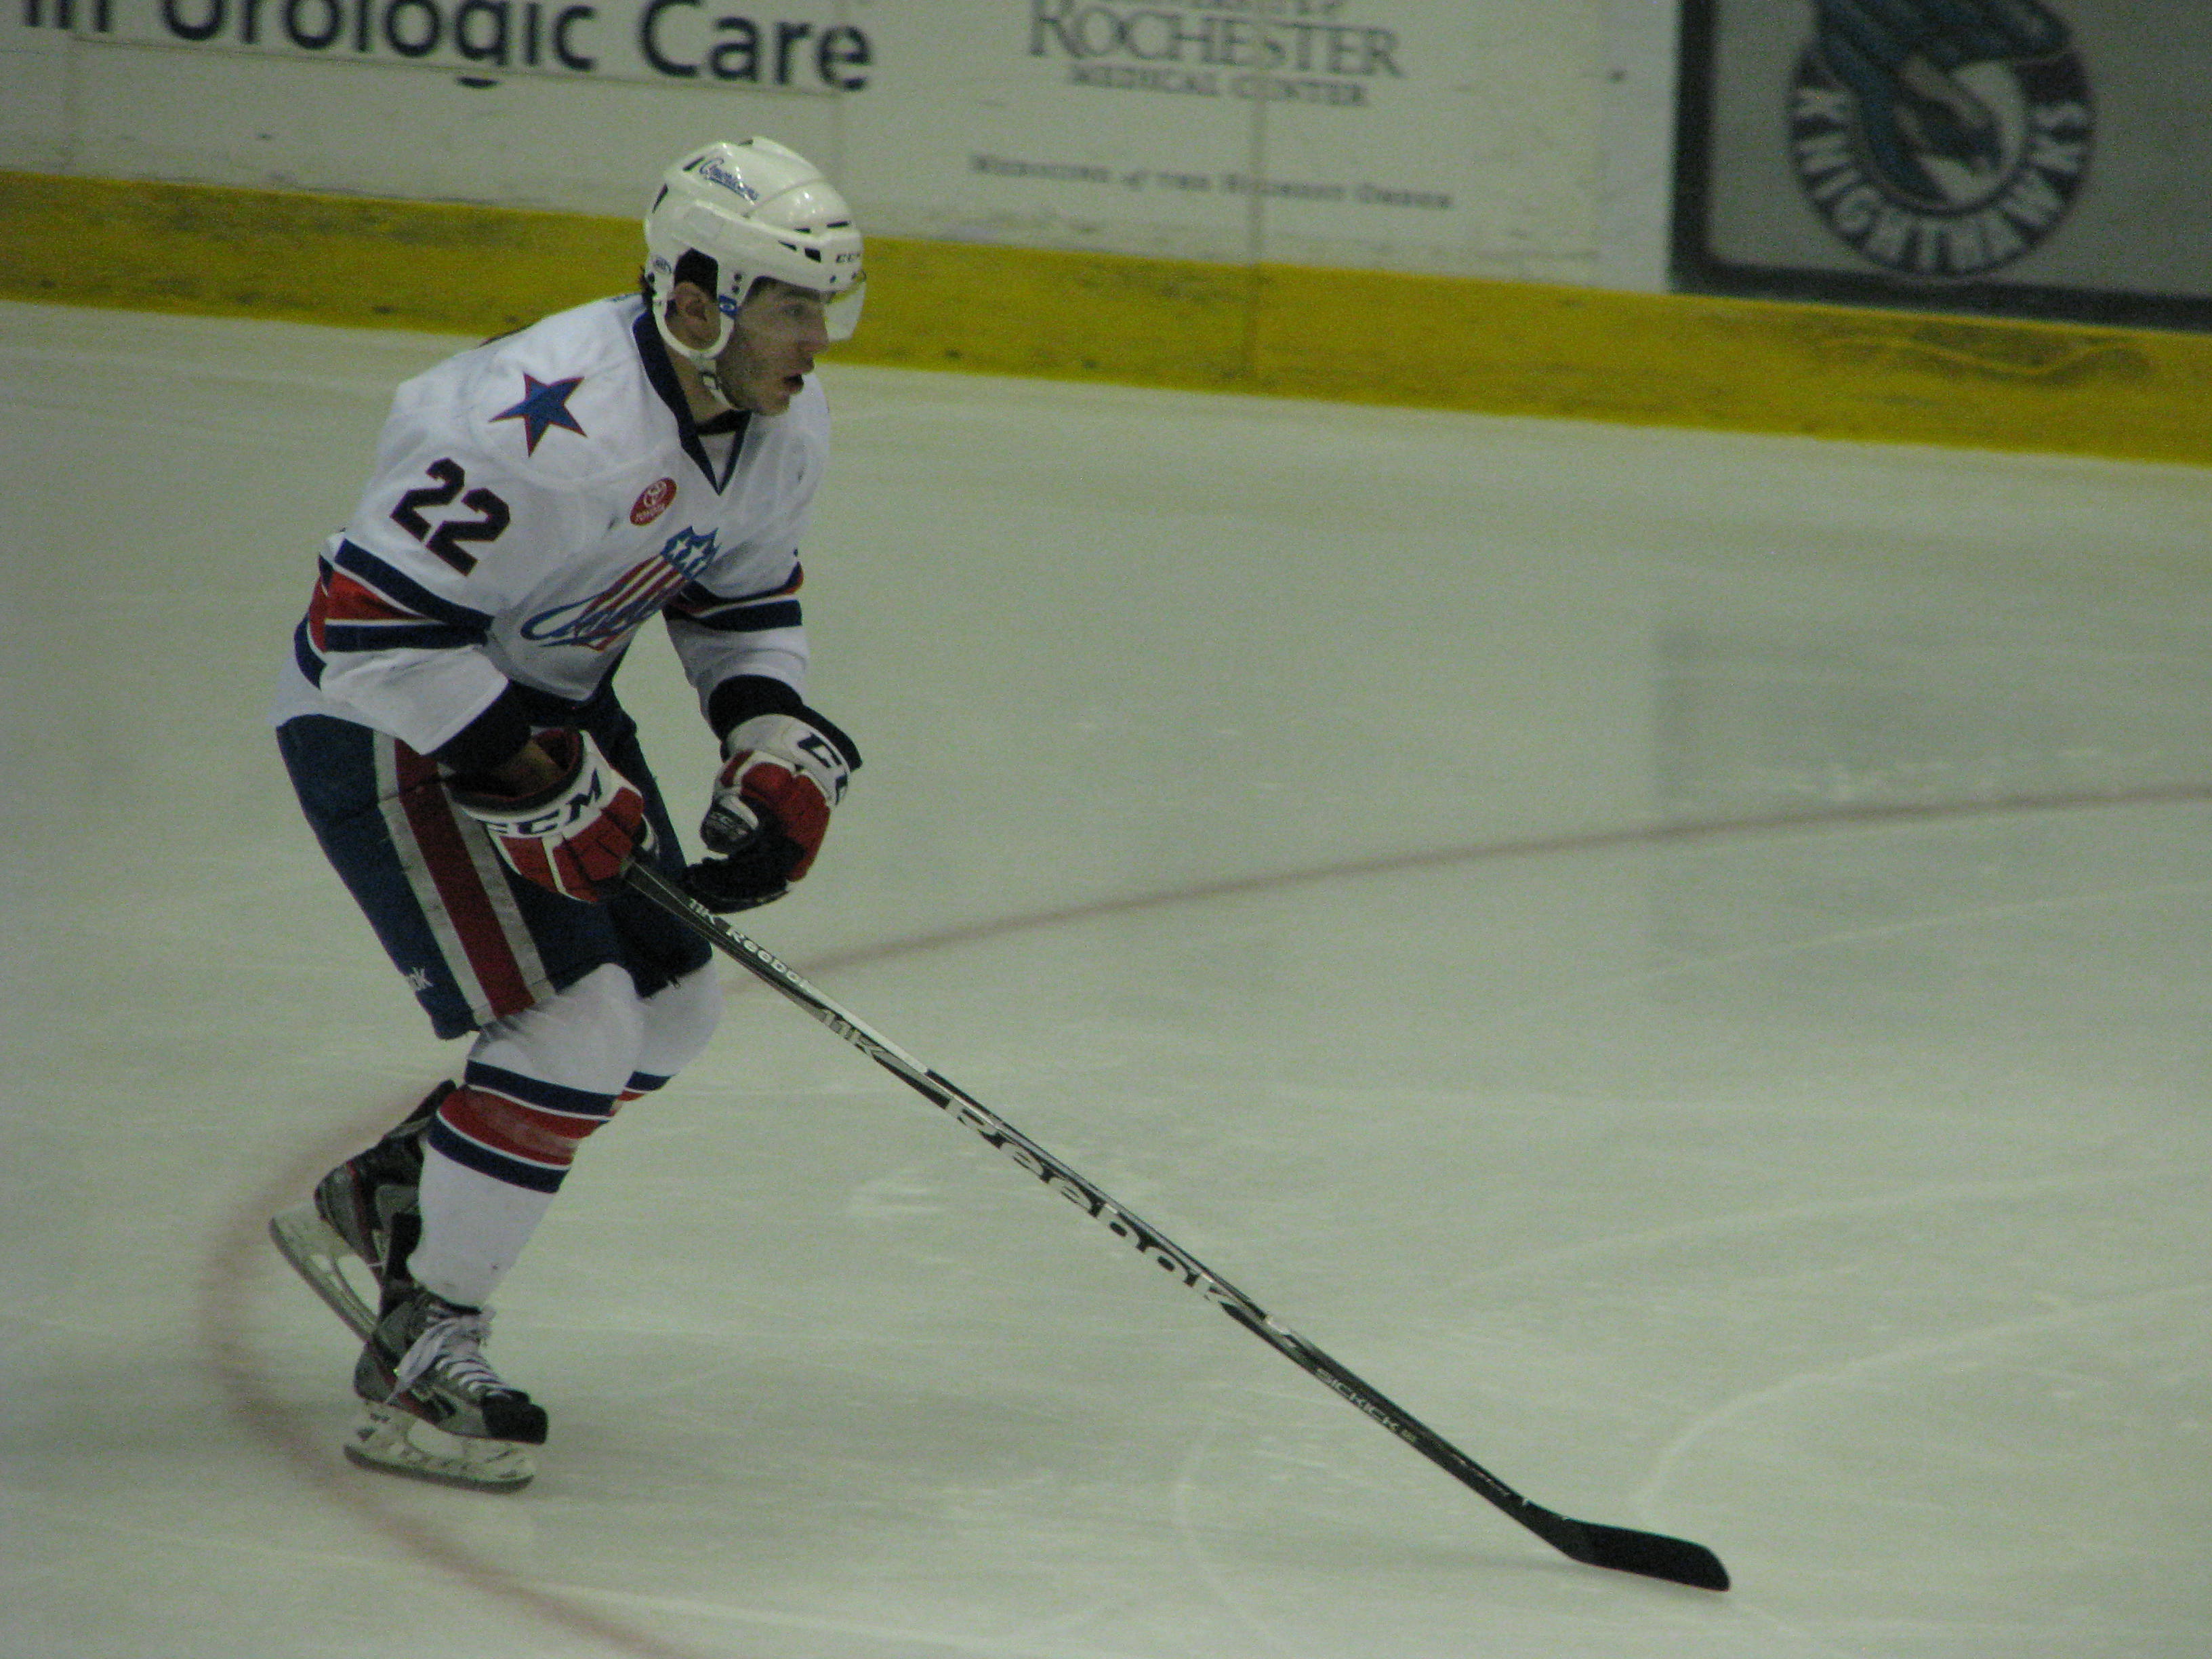 Varone and Igor Lead the Amerks to a 15 Round Shootout Win (with shootout video)